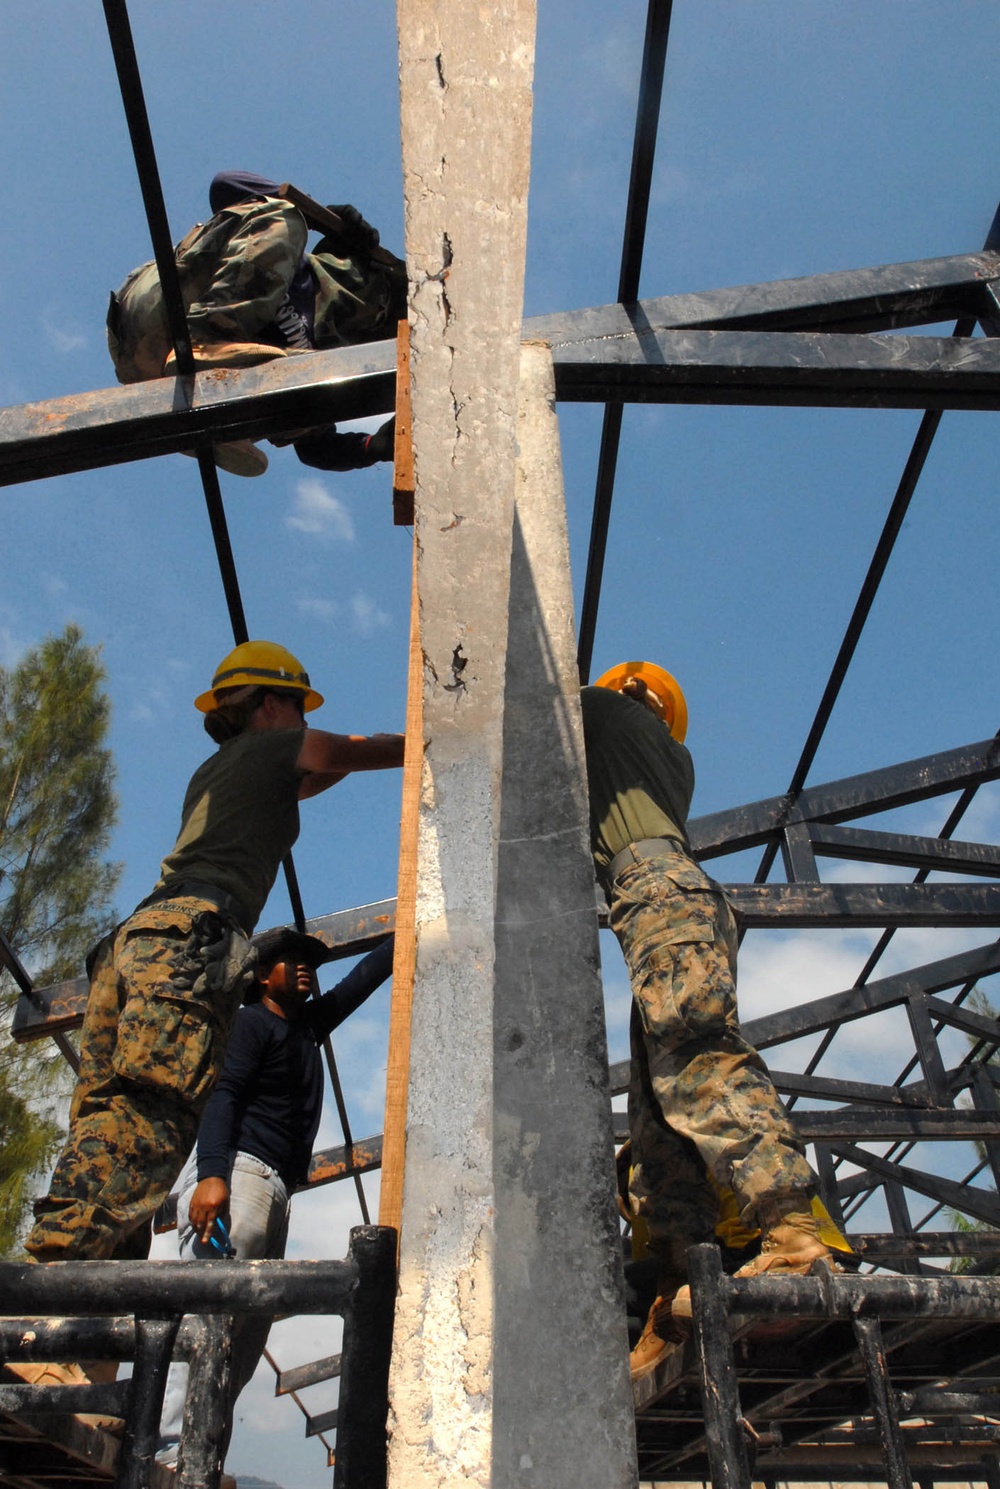 Engineers build buildings, relationships during CG10